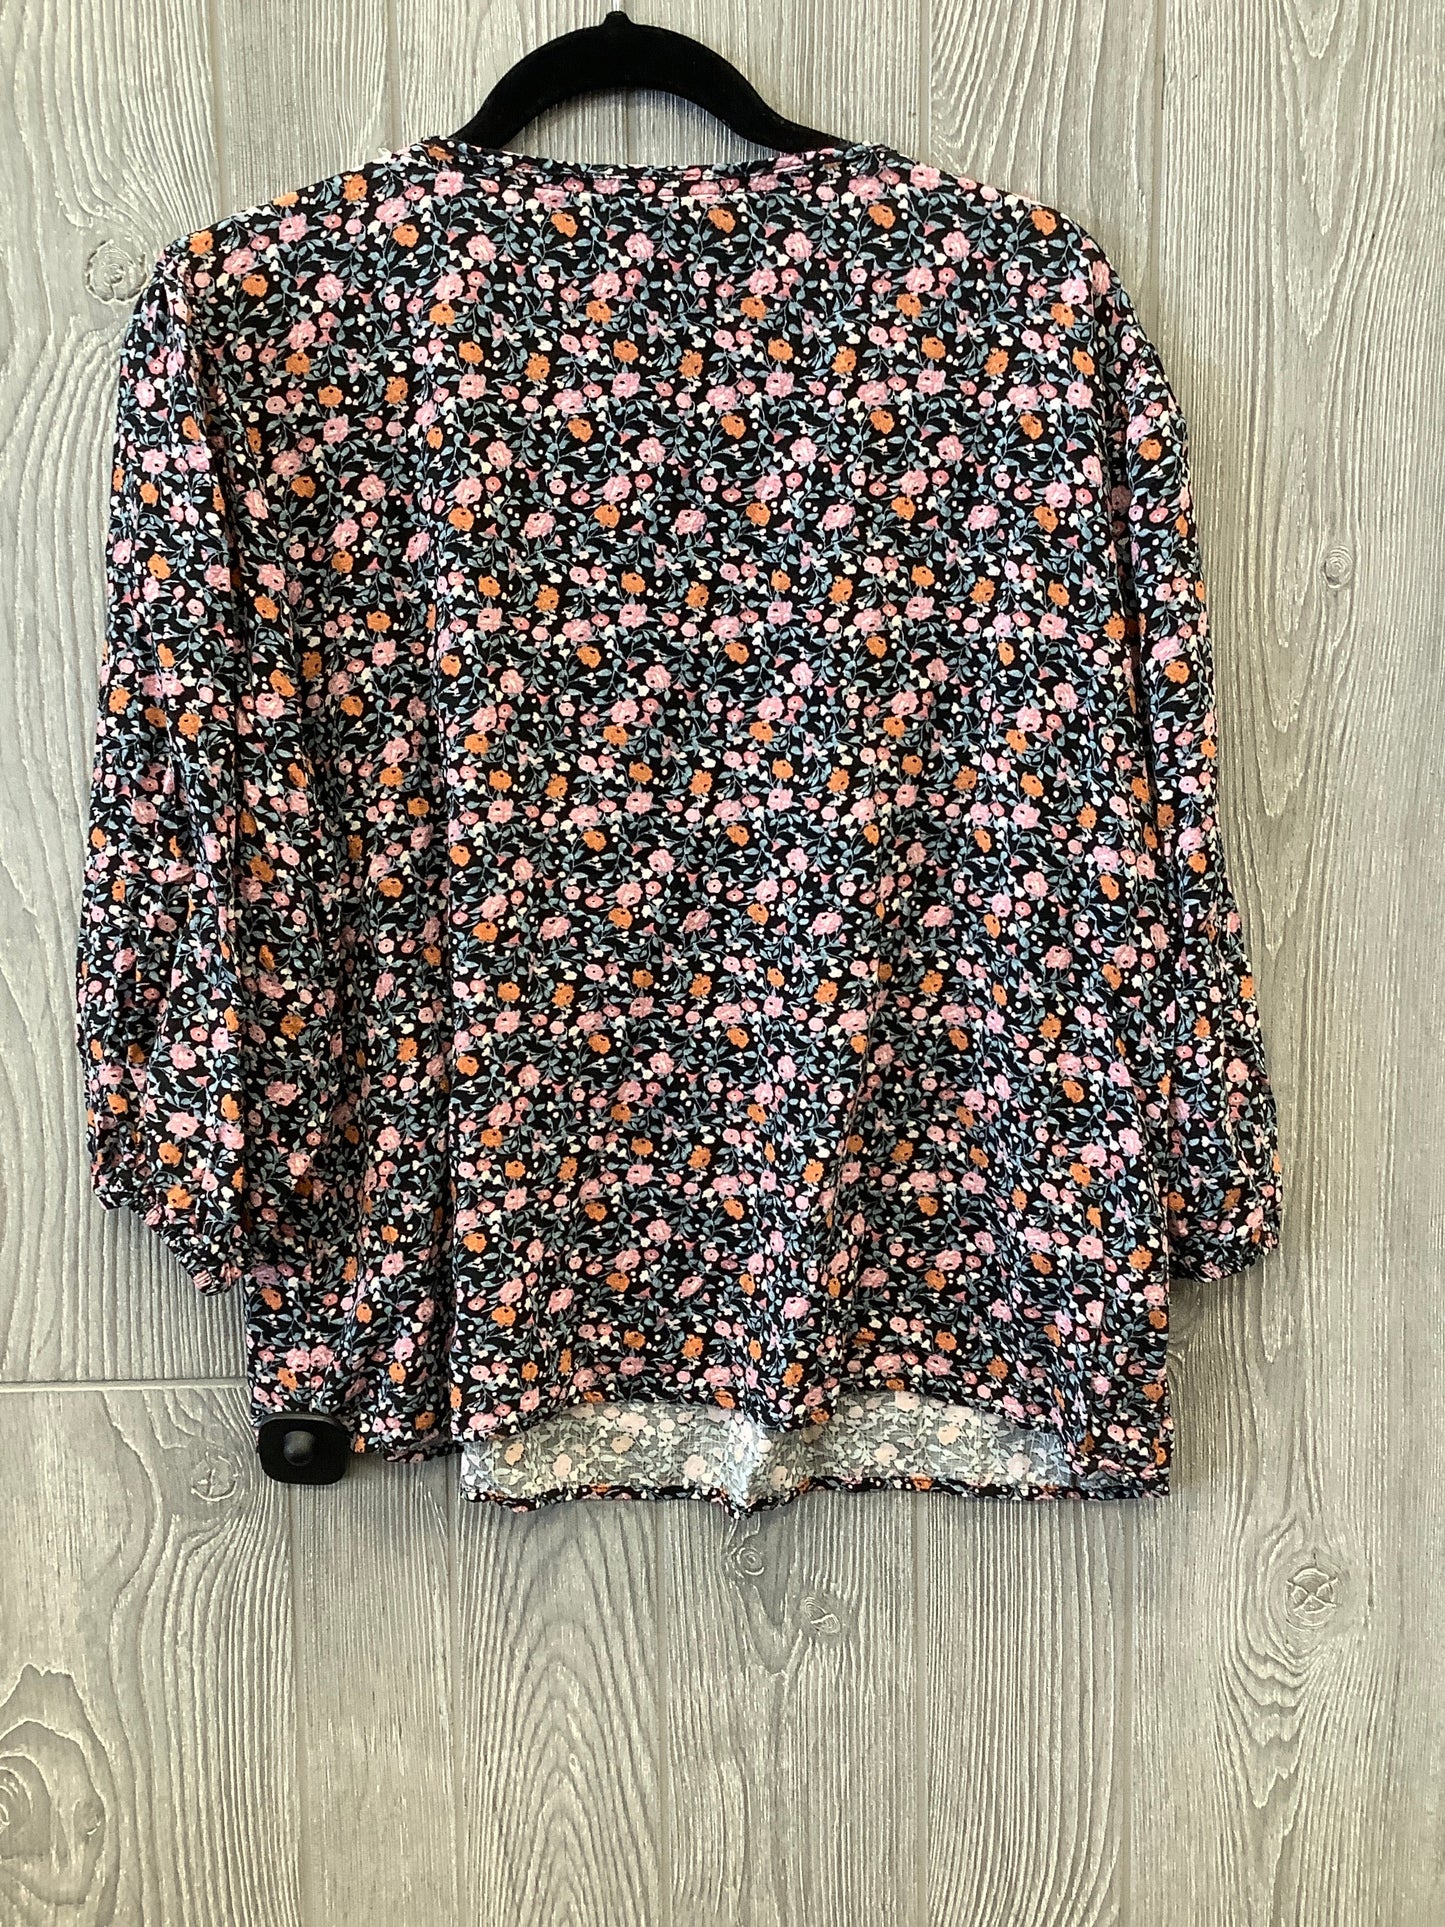 Floral Print Top 3/4 Sleeve Knox Rose, Size Xl